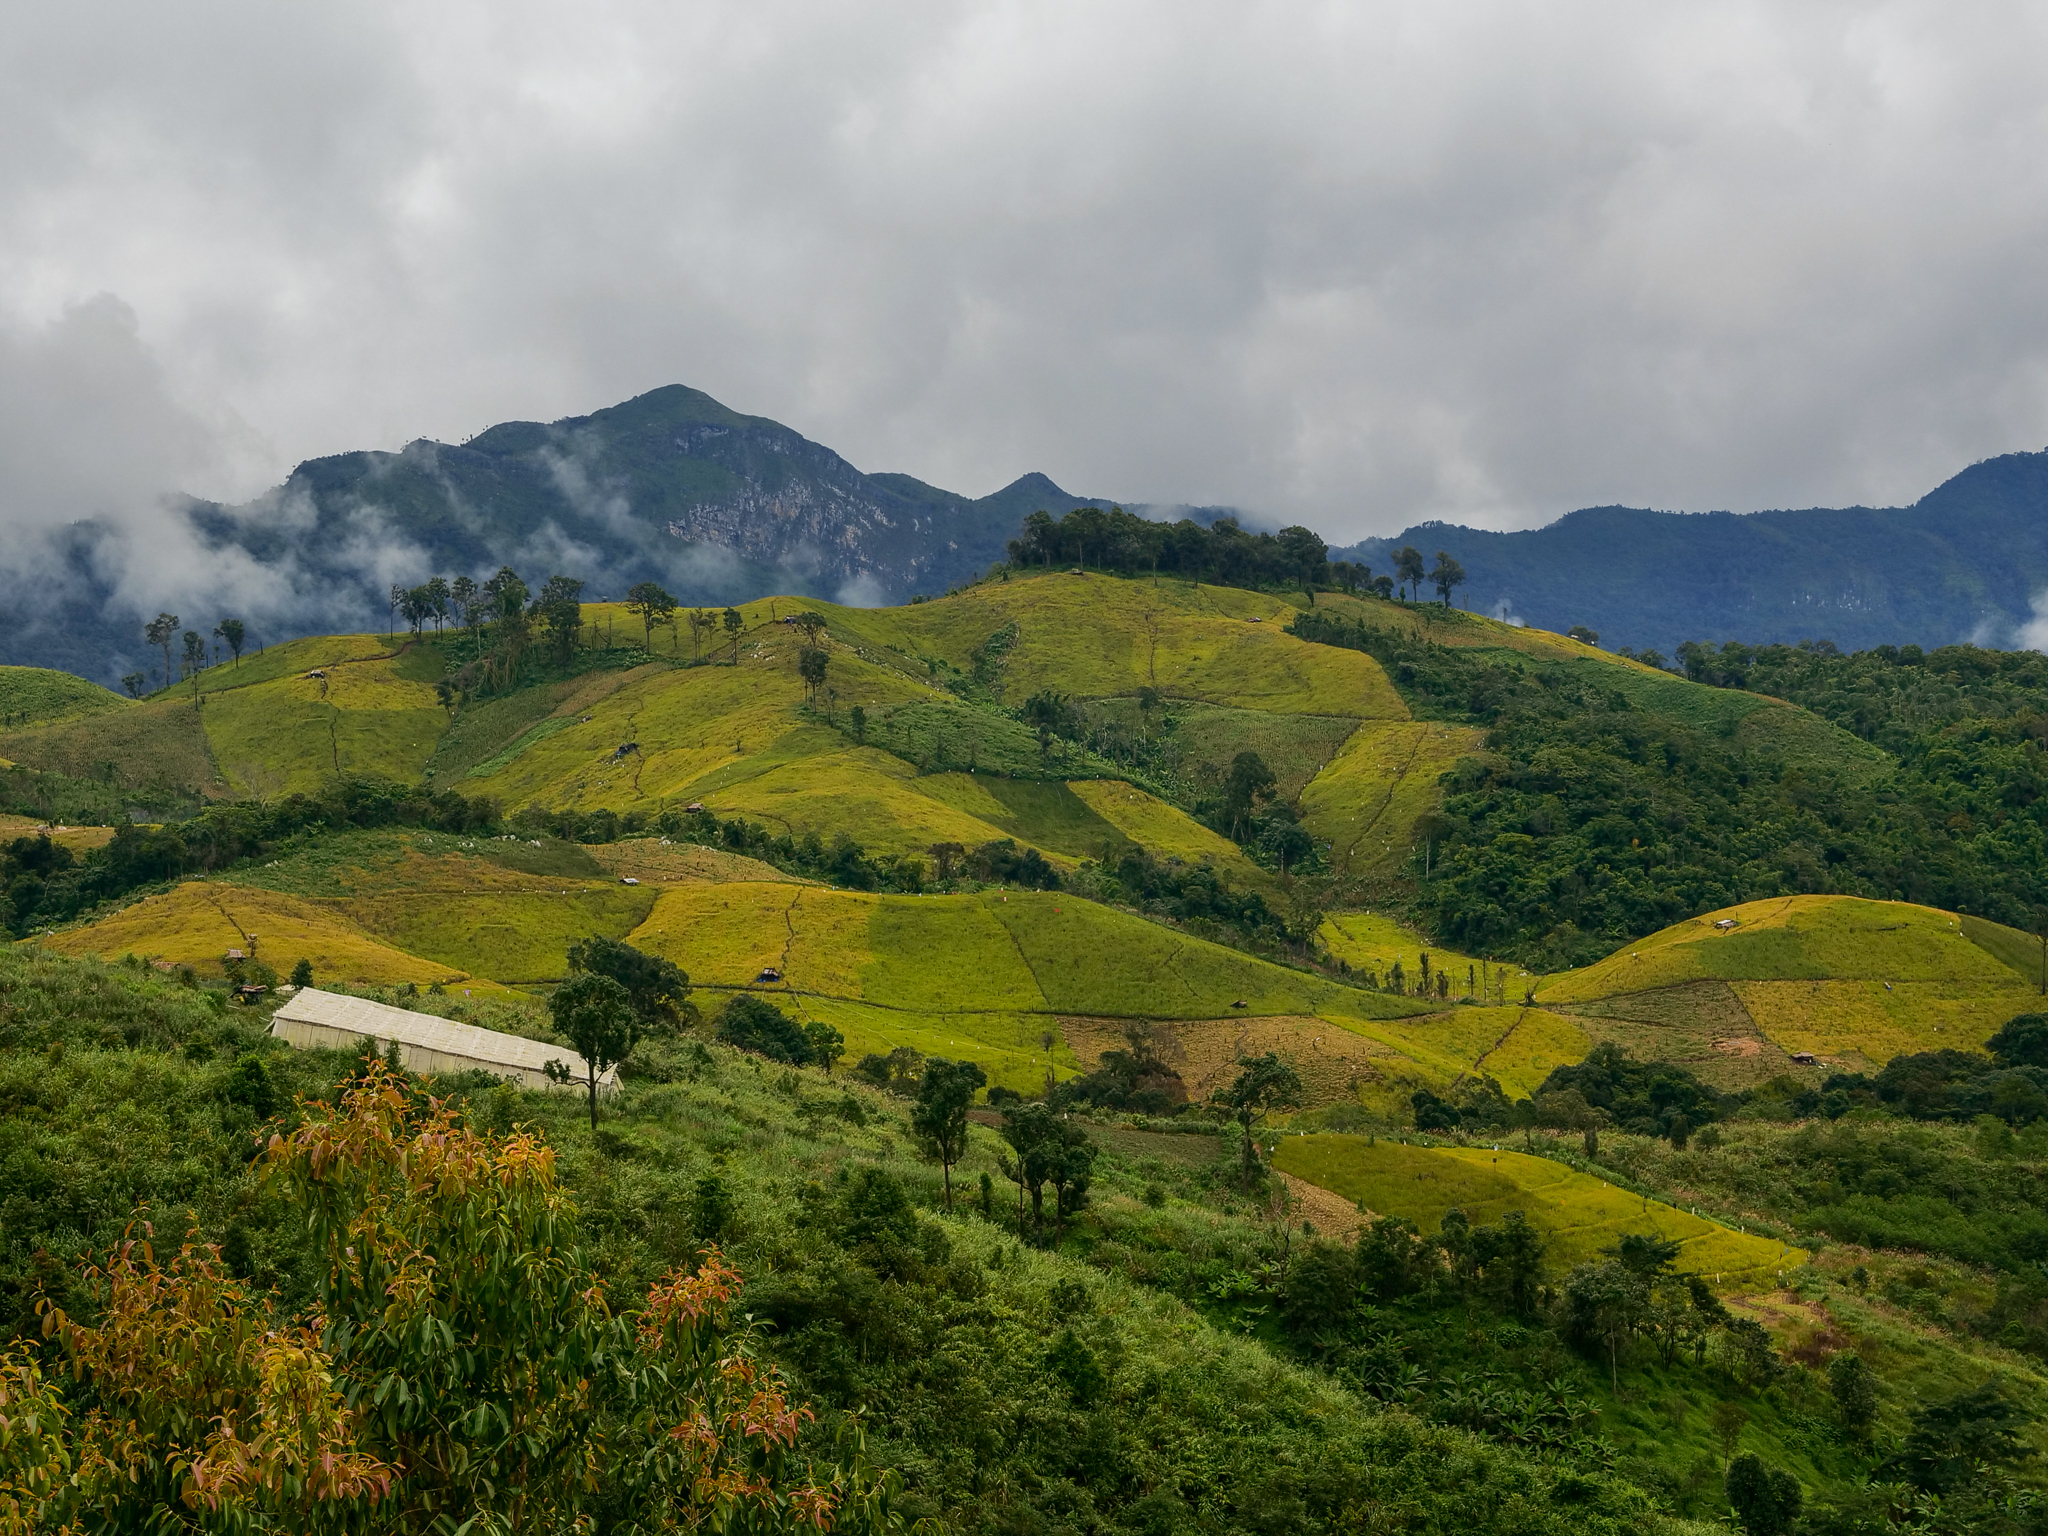 The mountainous agricultural areas of Manee Phruek Village are a fire-prone zone identified by the CBFiM project. Photo by RECOFTC.